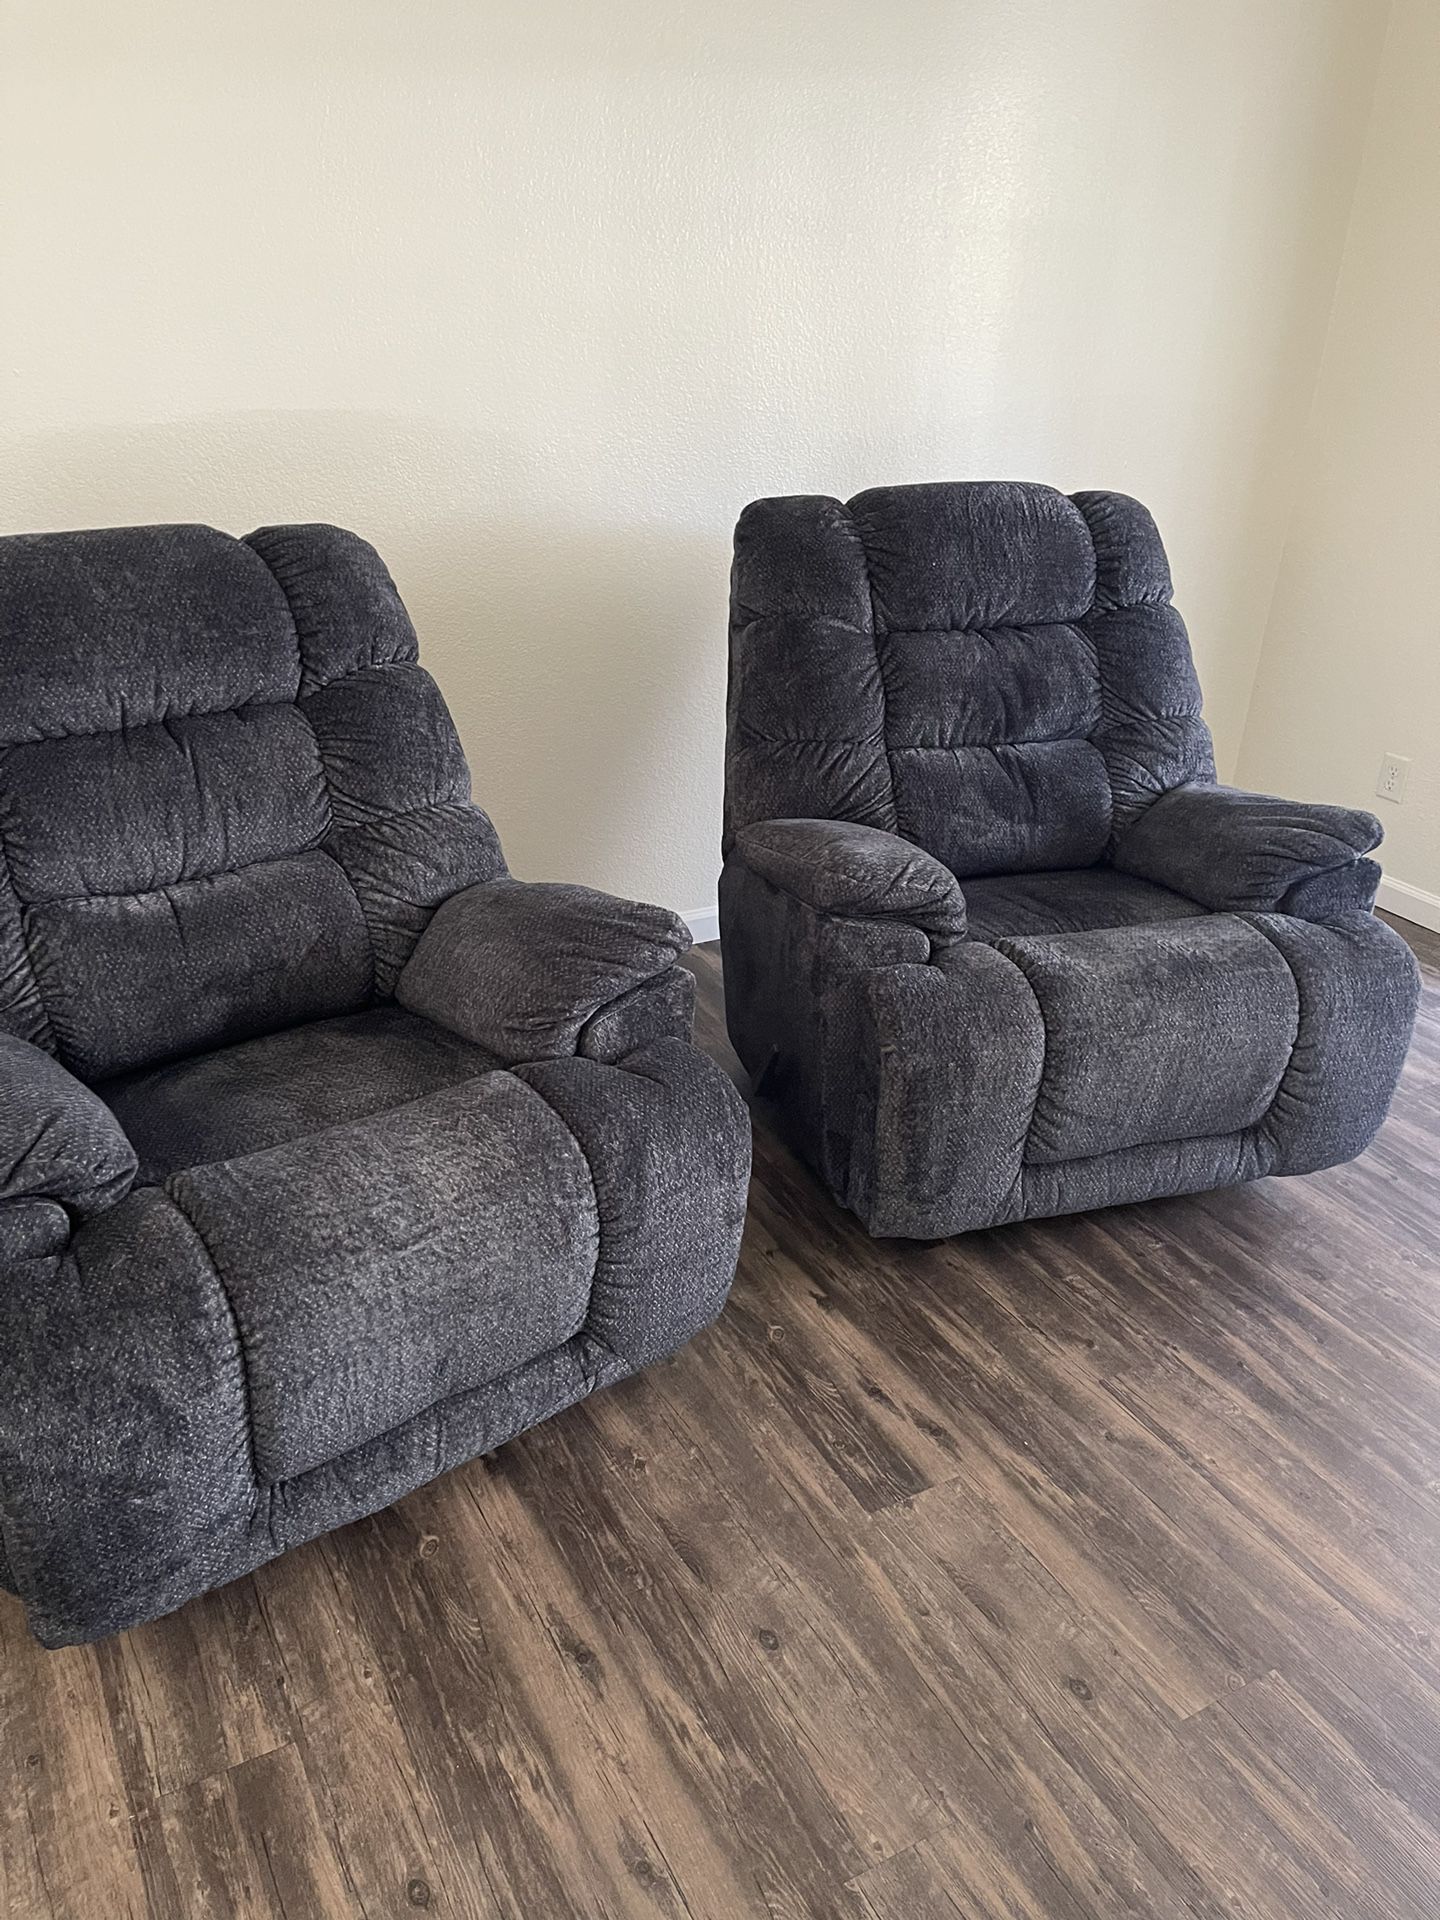 Recliner Chairs , Lazy Boy, Living Room Furniture , Sofa 